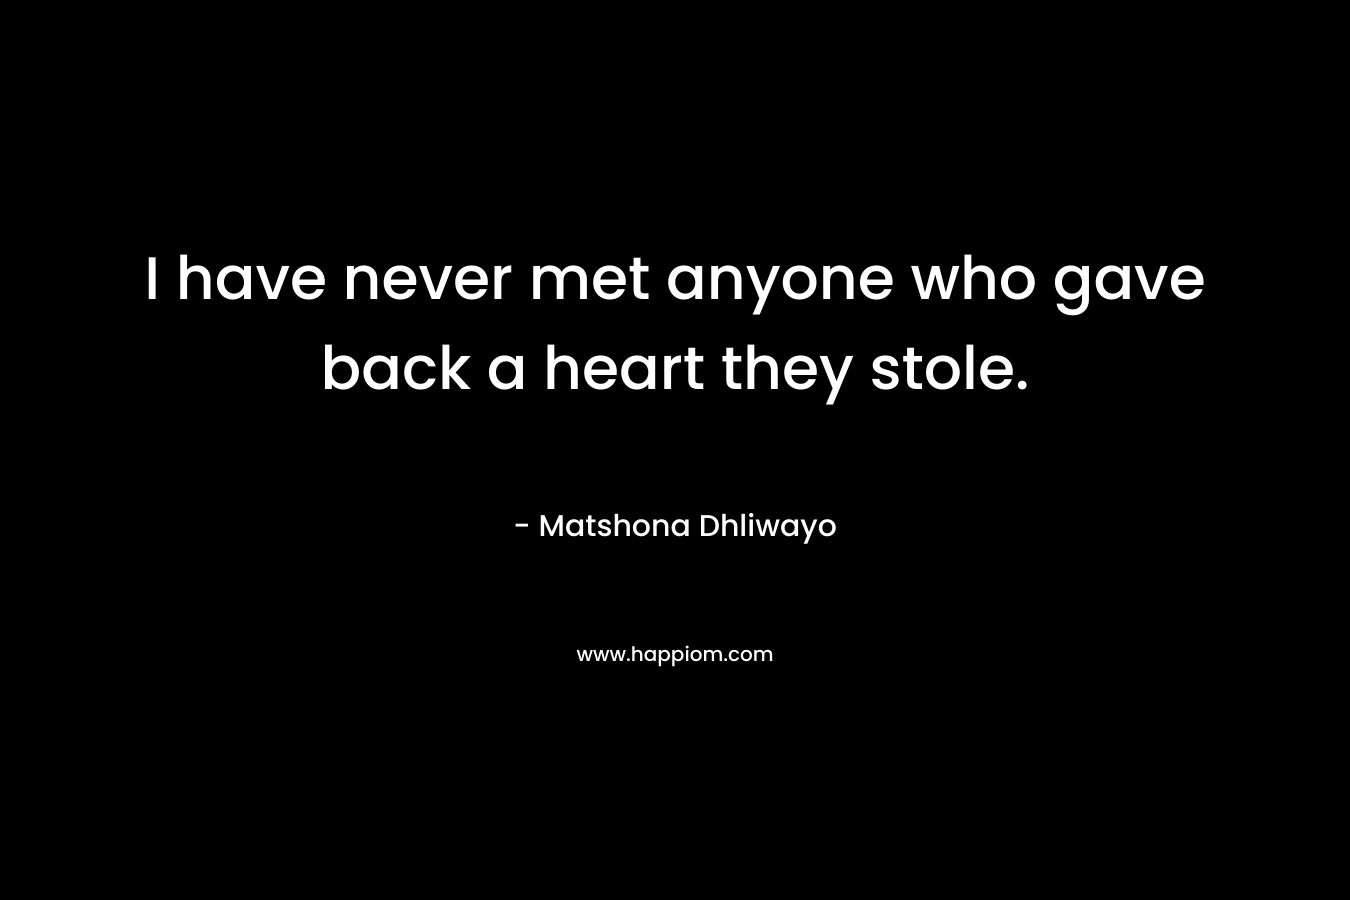 I have never met anyone who gave back a heart they stole.